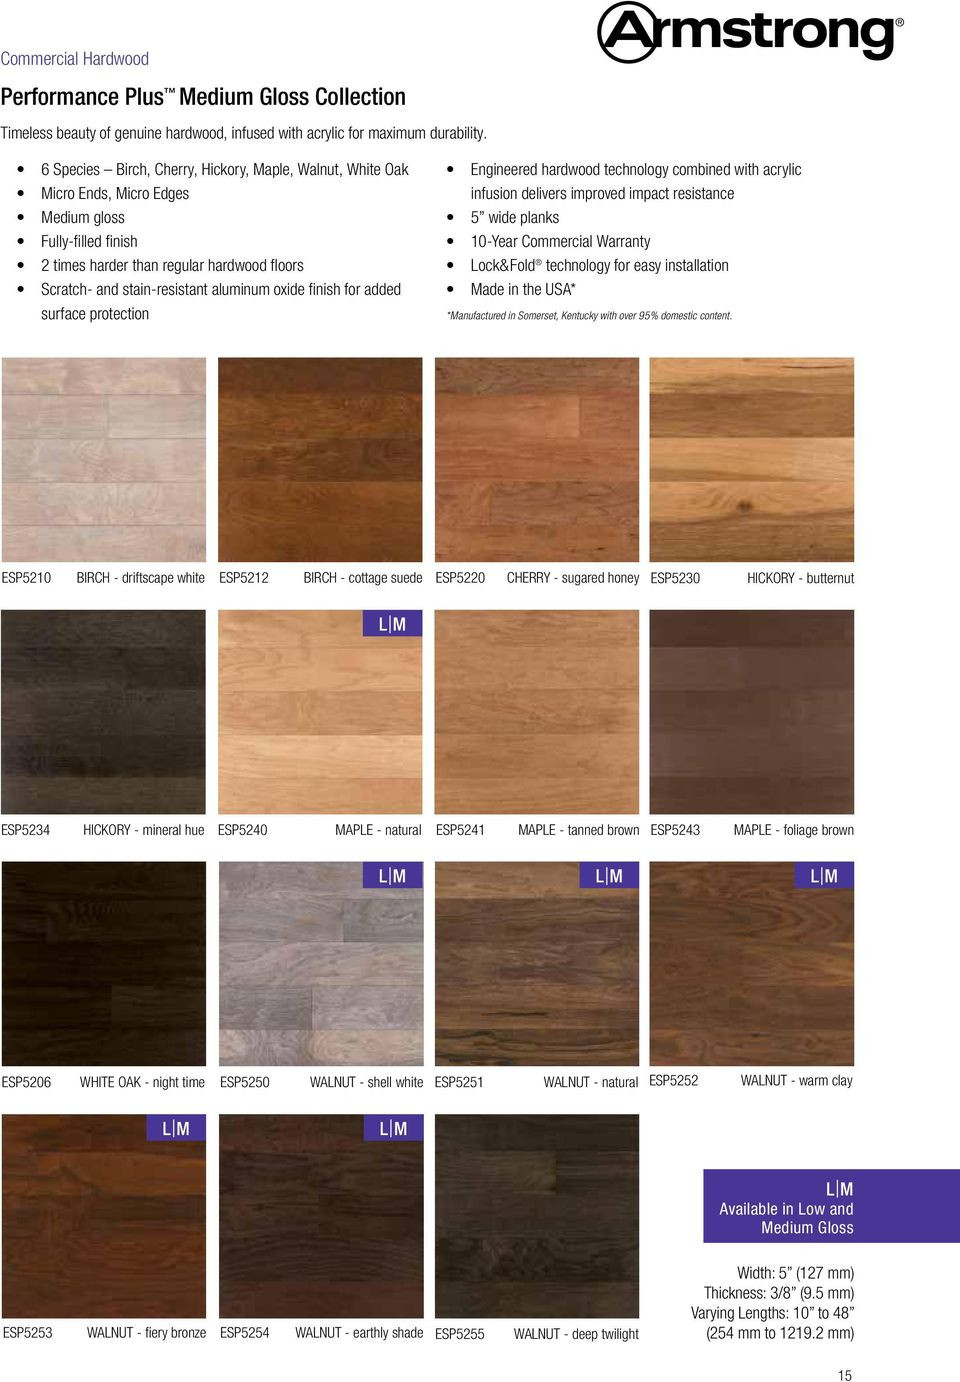 26 Fashionable Quality Engineered Hardwood Flooring 2024 free download quality engineered hardwood flooring of performance plus midtown pdf regarding oxide finish for added surface protection engineered hardwood technology combined with acrylic infusion deliver